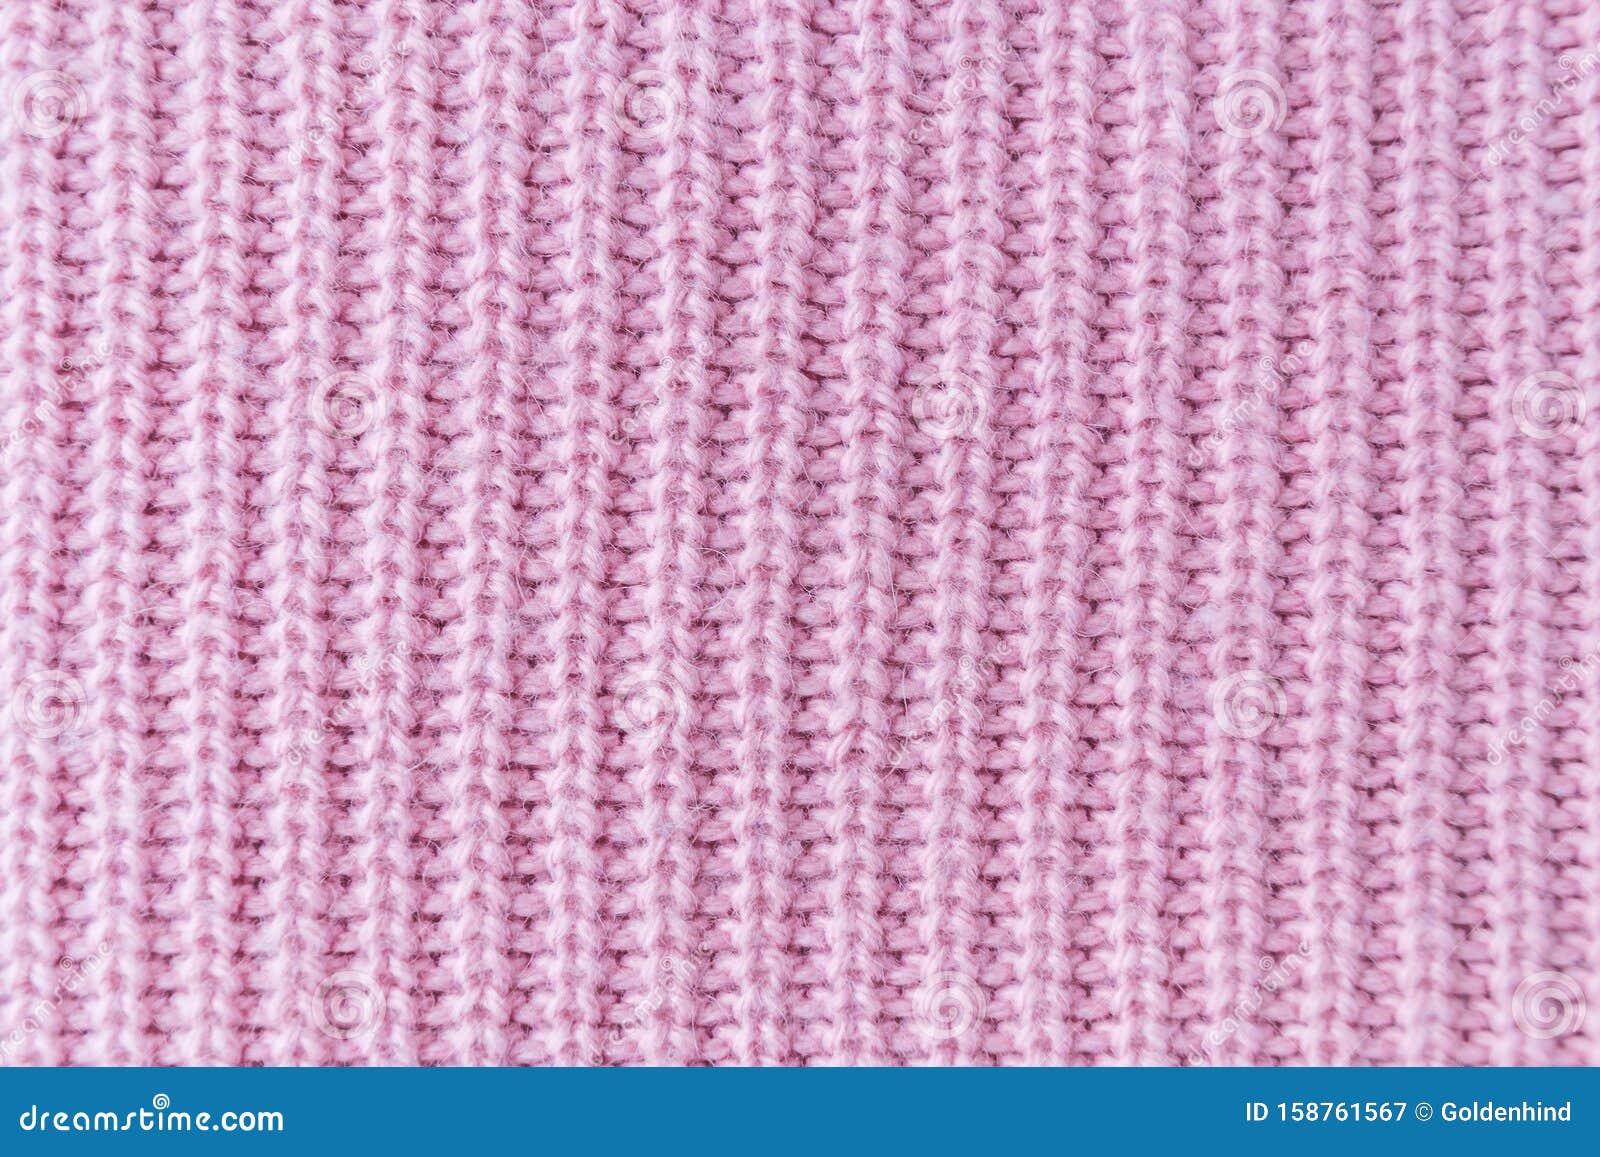 the closeup texture of pink cashmere sweater background. macro shot of knitted fabric from lana wool threads